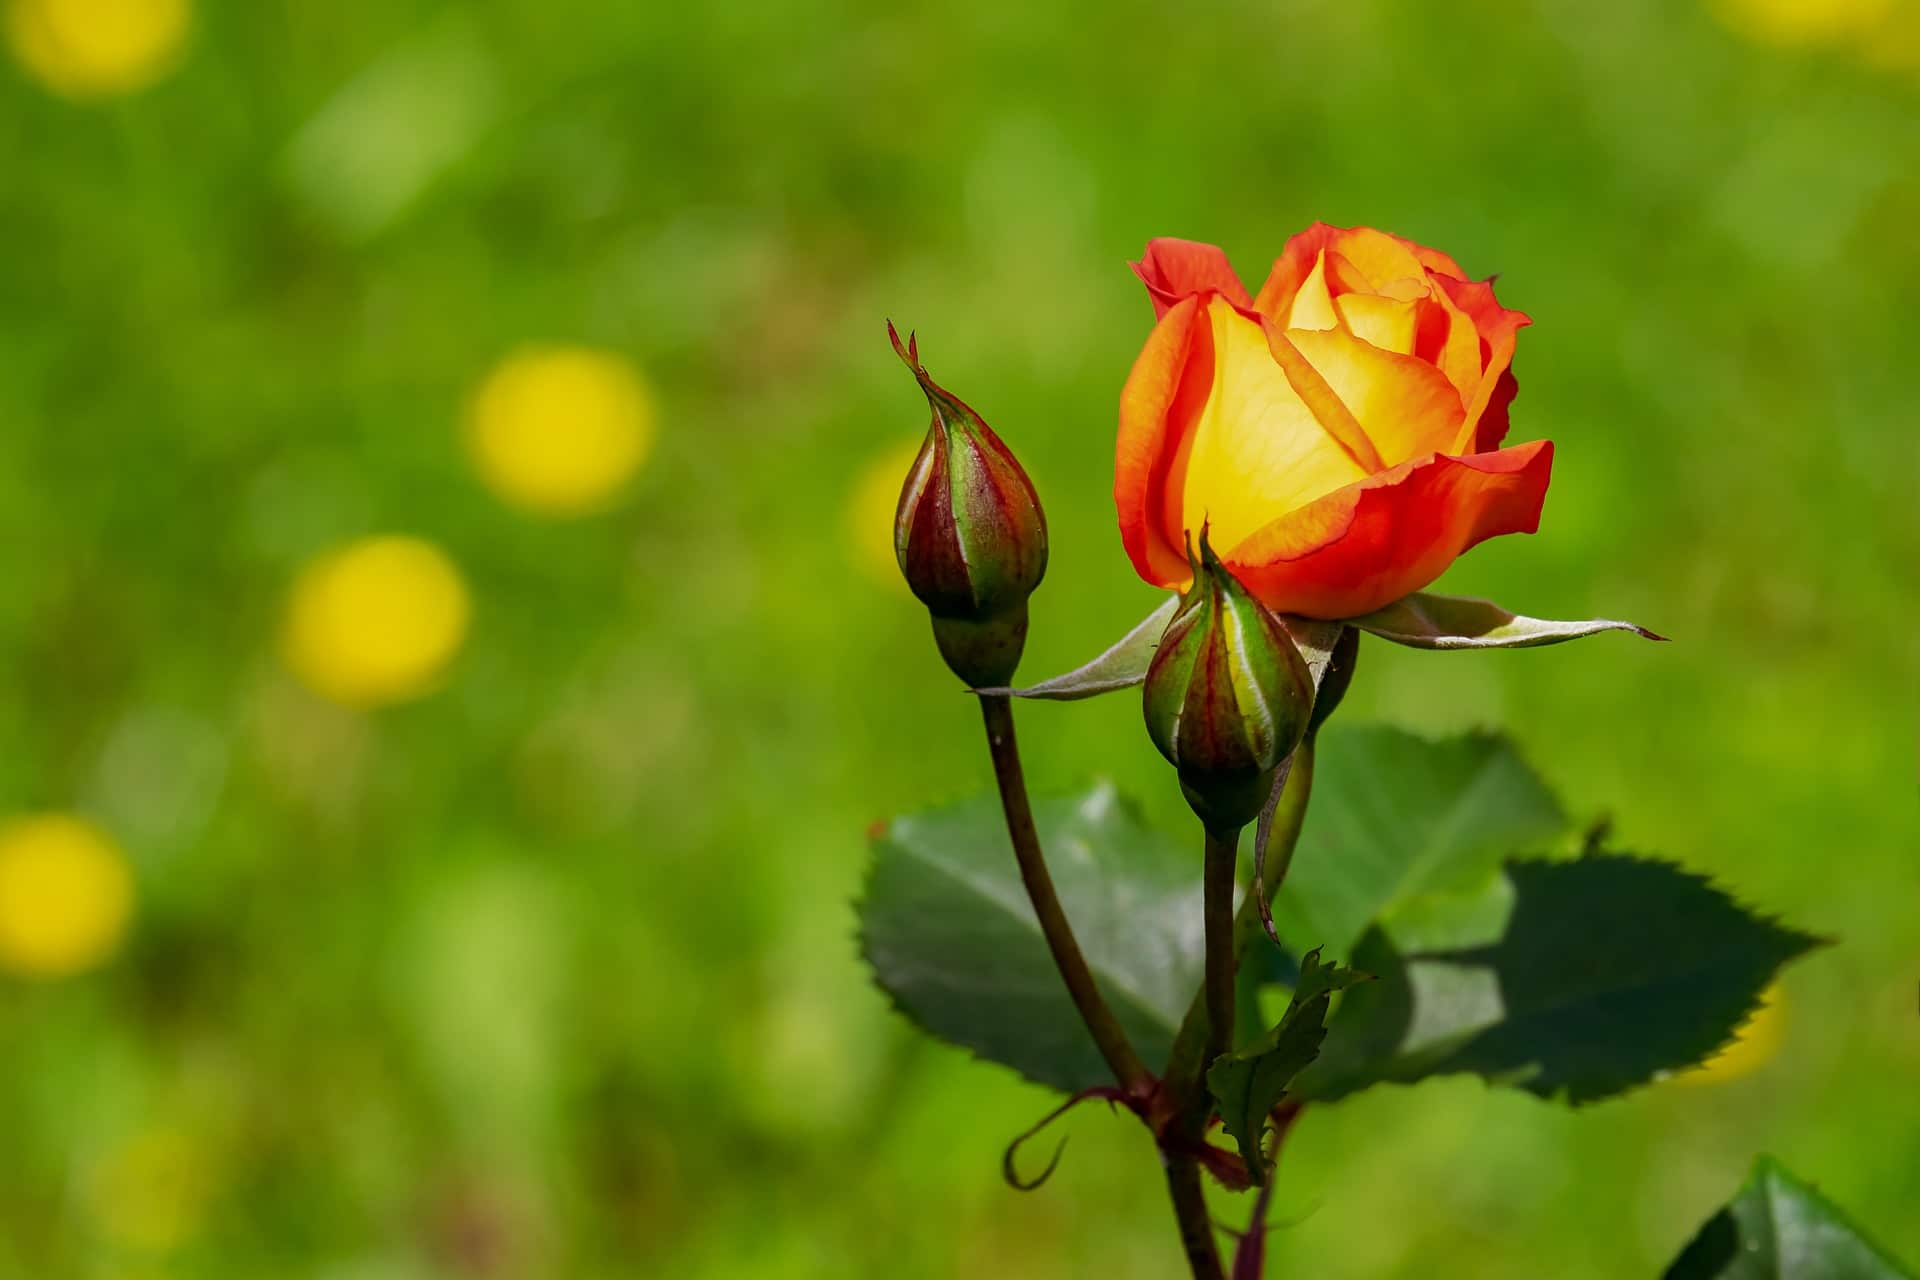 How to grow roses from seeds, roses and buds